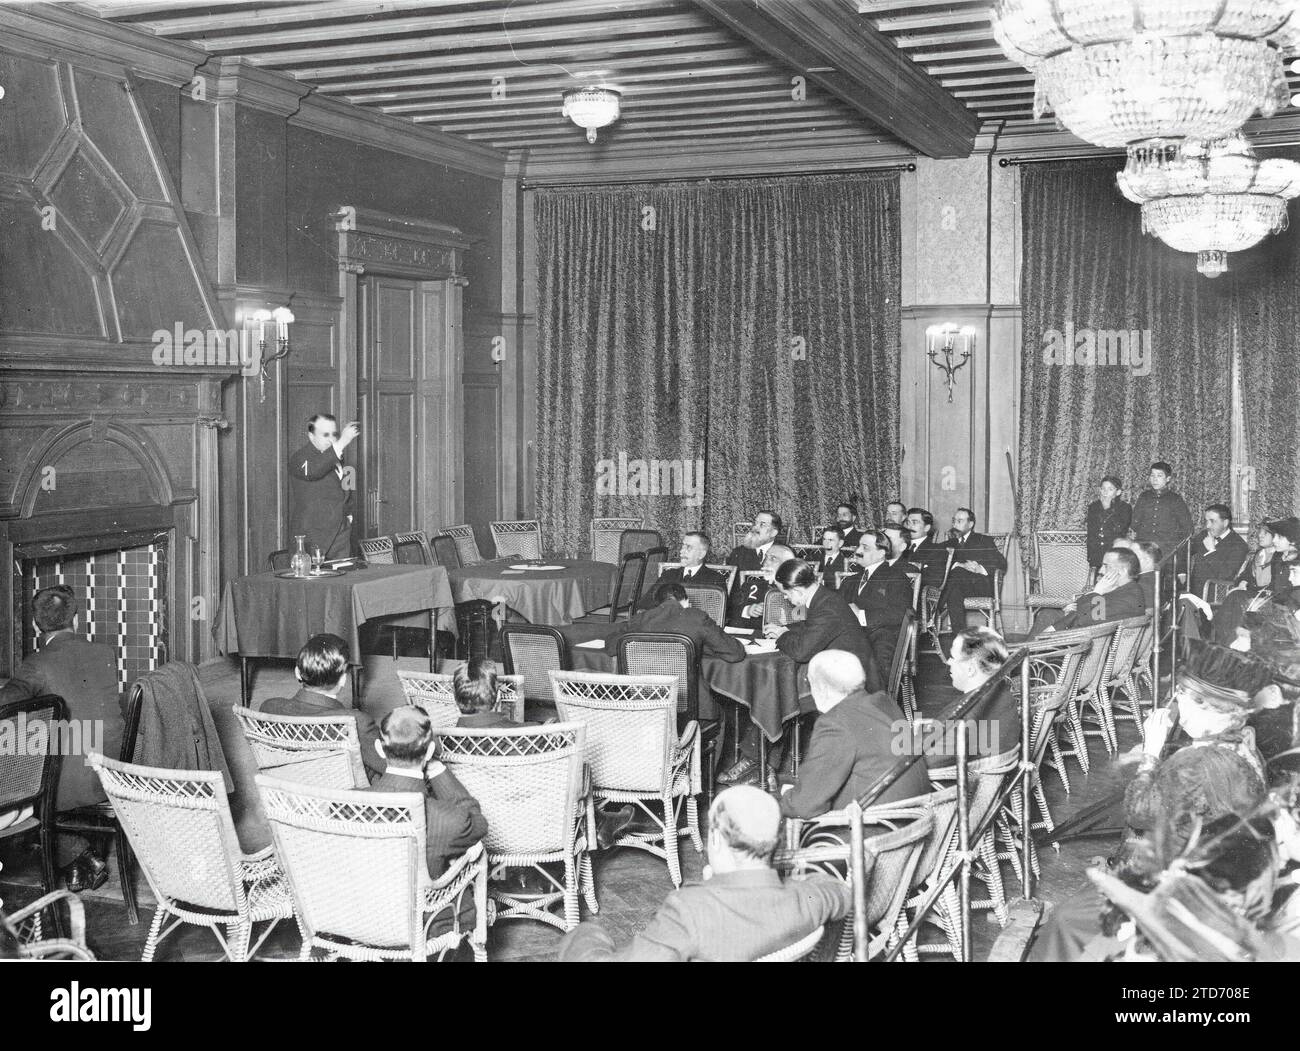 02/04/1917. Conferences of the Maurist center and youth of Madrid. Mr. Pío Zabala (1) during his speech yesterday at the Palace Hotel, with the assistance of Mr. Maura (2). Credit: Album / Archivo ABC / Julio Duque Stock Photo